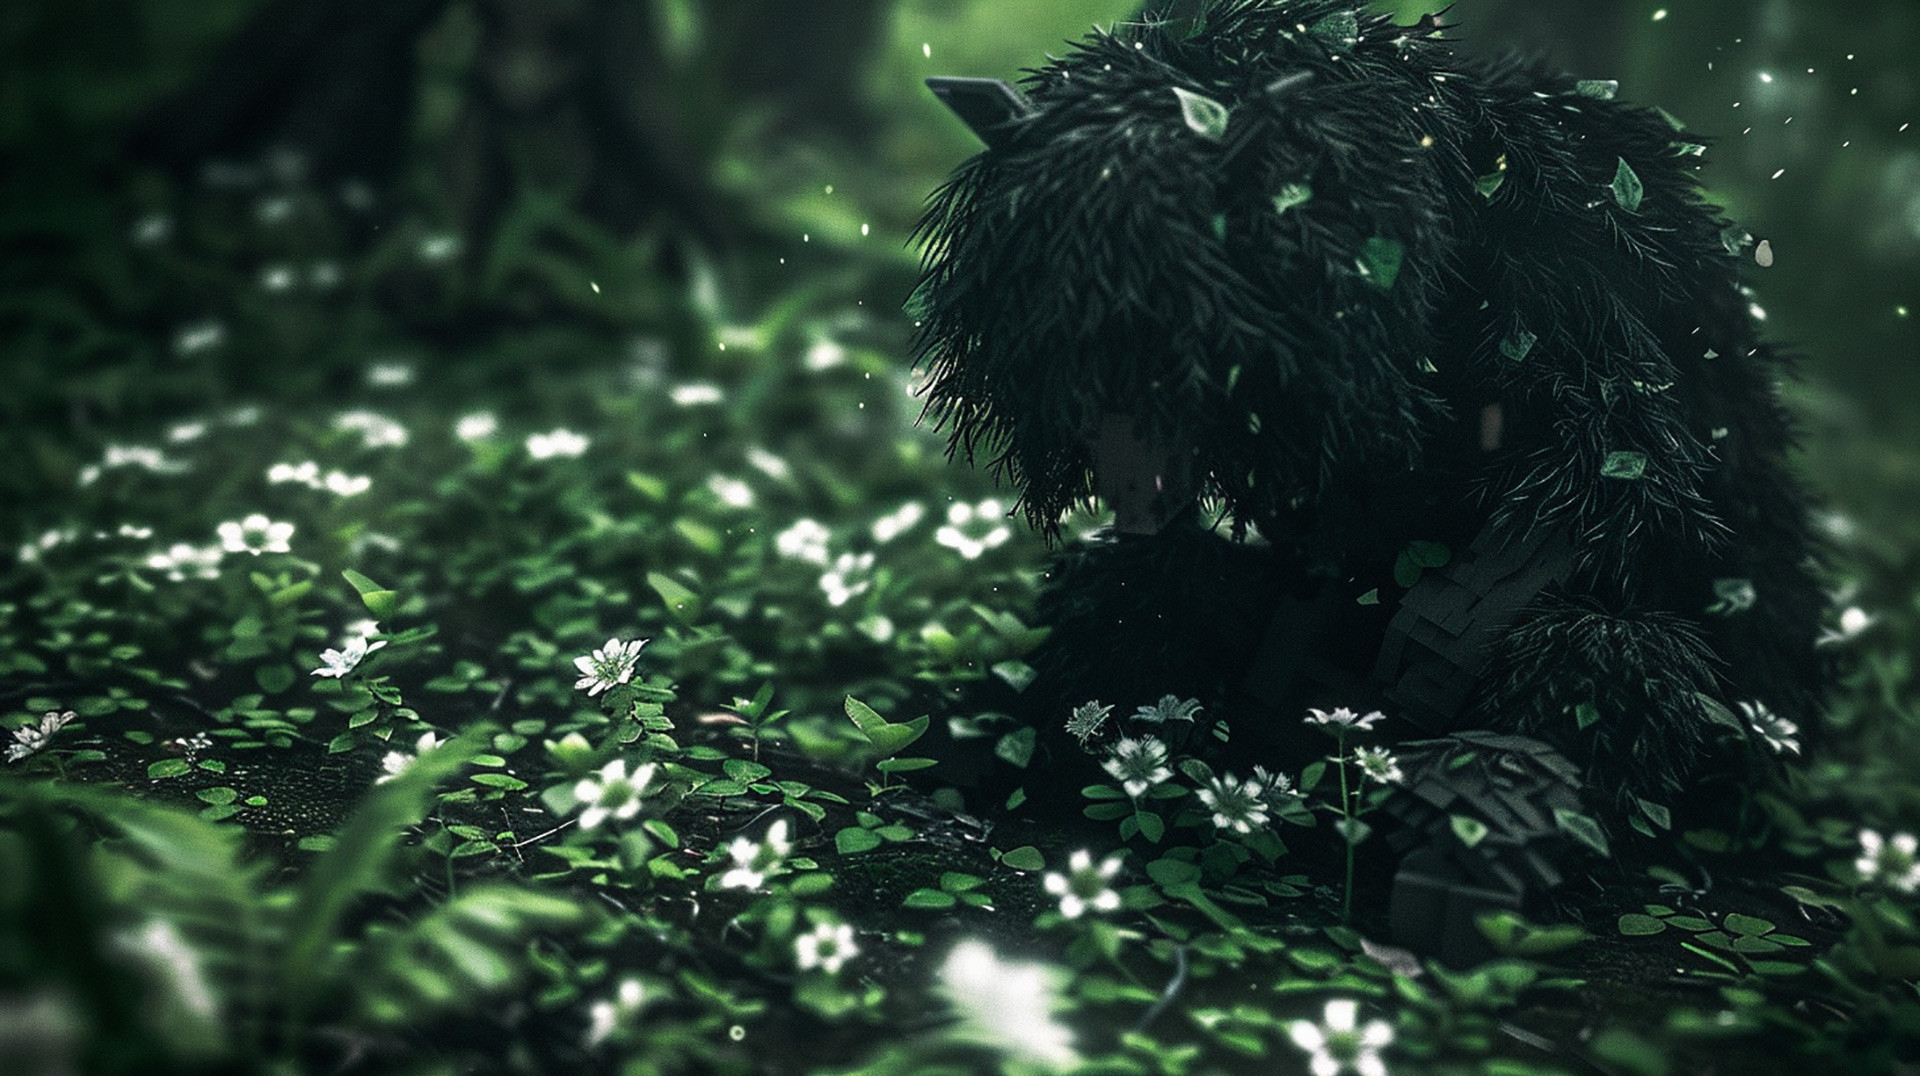 Serene Horse: AI-Rendered 1920x1080 Wallpaper for PC